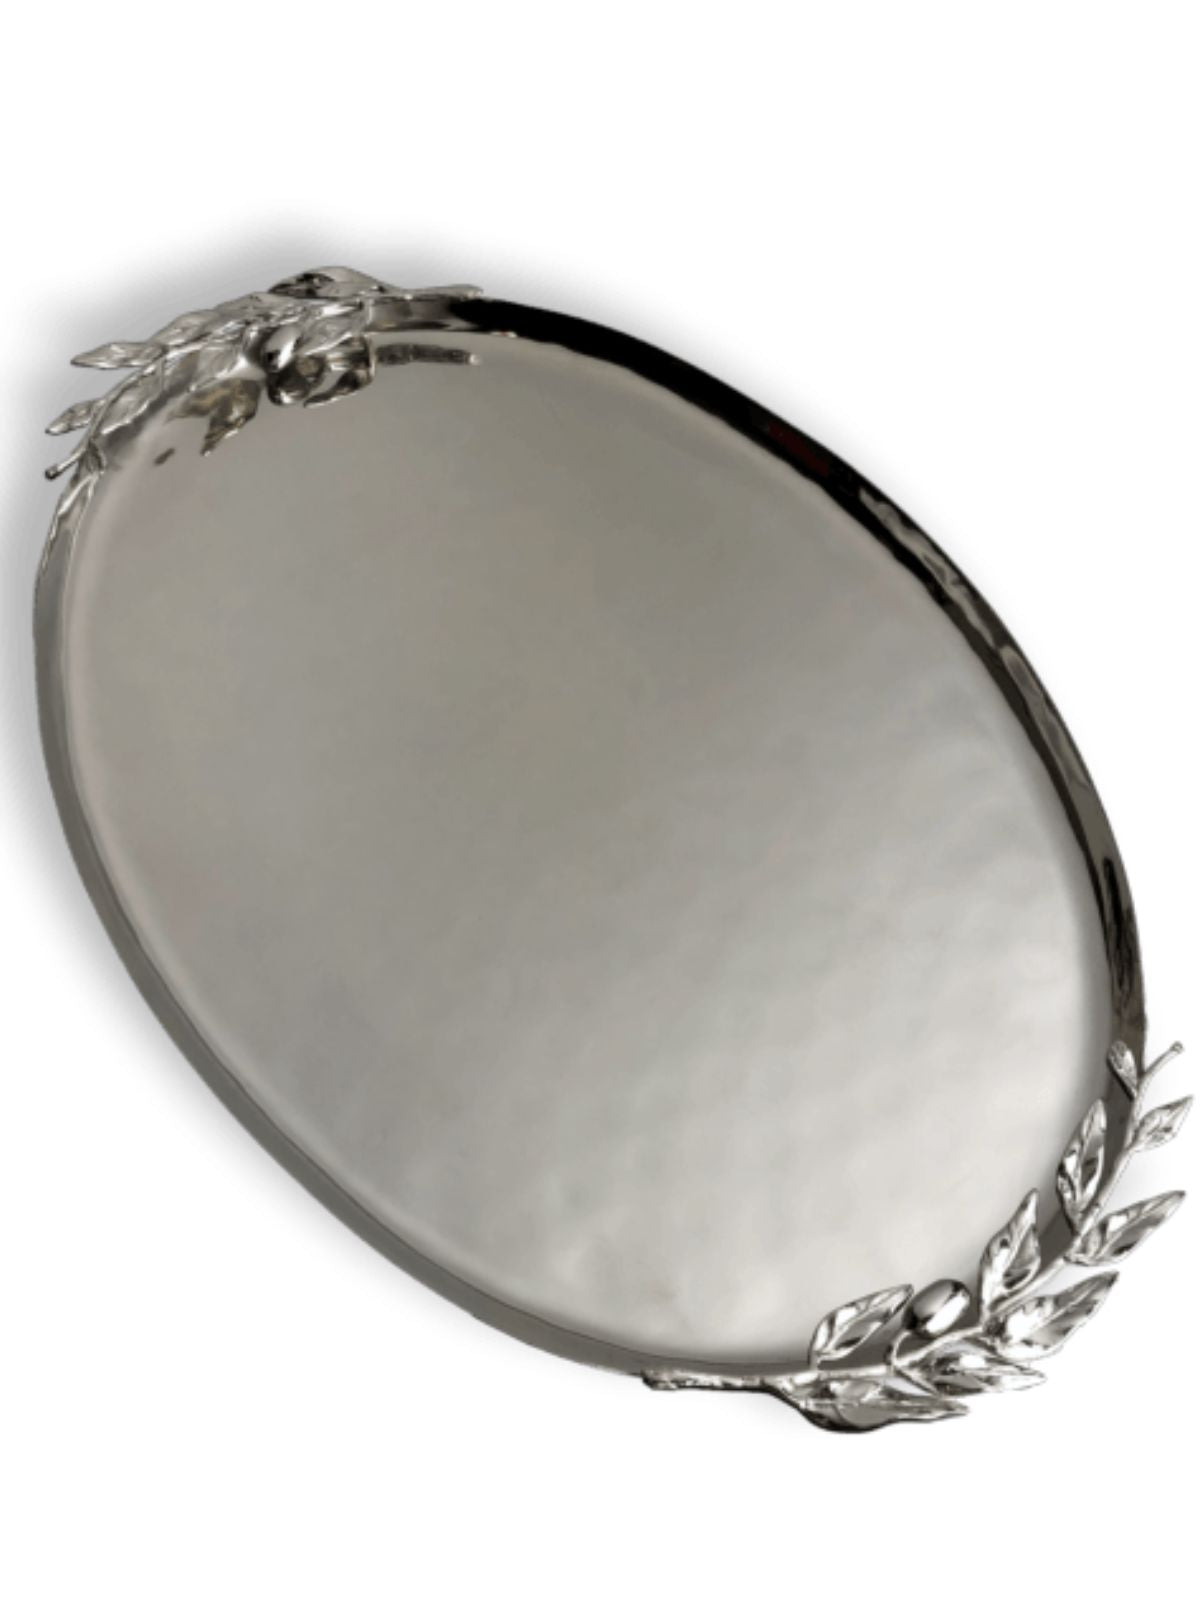 23 inch Stainless Steel Centerpiece Serving Tray with hammered textures and olive leaf designs on the edges, Sold by KYA Home Decor.